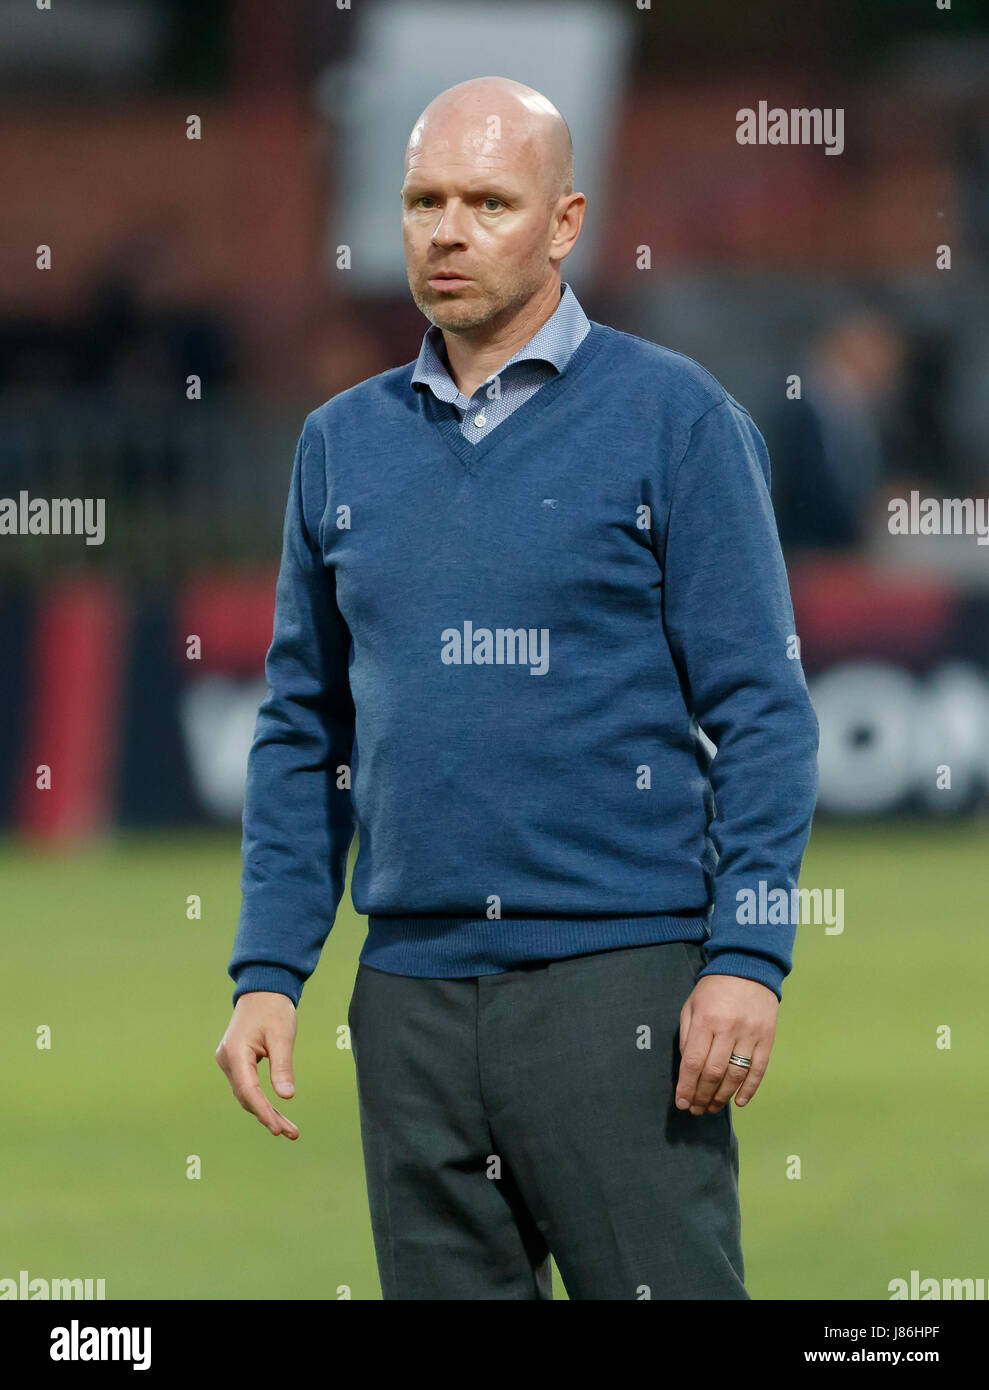 Budapest, Hungary. 27th May, 2017. Head coach Henning Berg of Videoton FC looks disappointed during the Hungarian OTP Bank Liga match between Budapest Honved and Videoton FC at Bozsik Stadium on May 27, 2017 in Budapest, Hungary. Credit: Laszlo Szirtesi/Alamy Live News Stock Photo